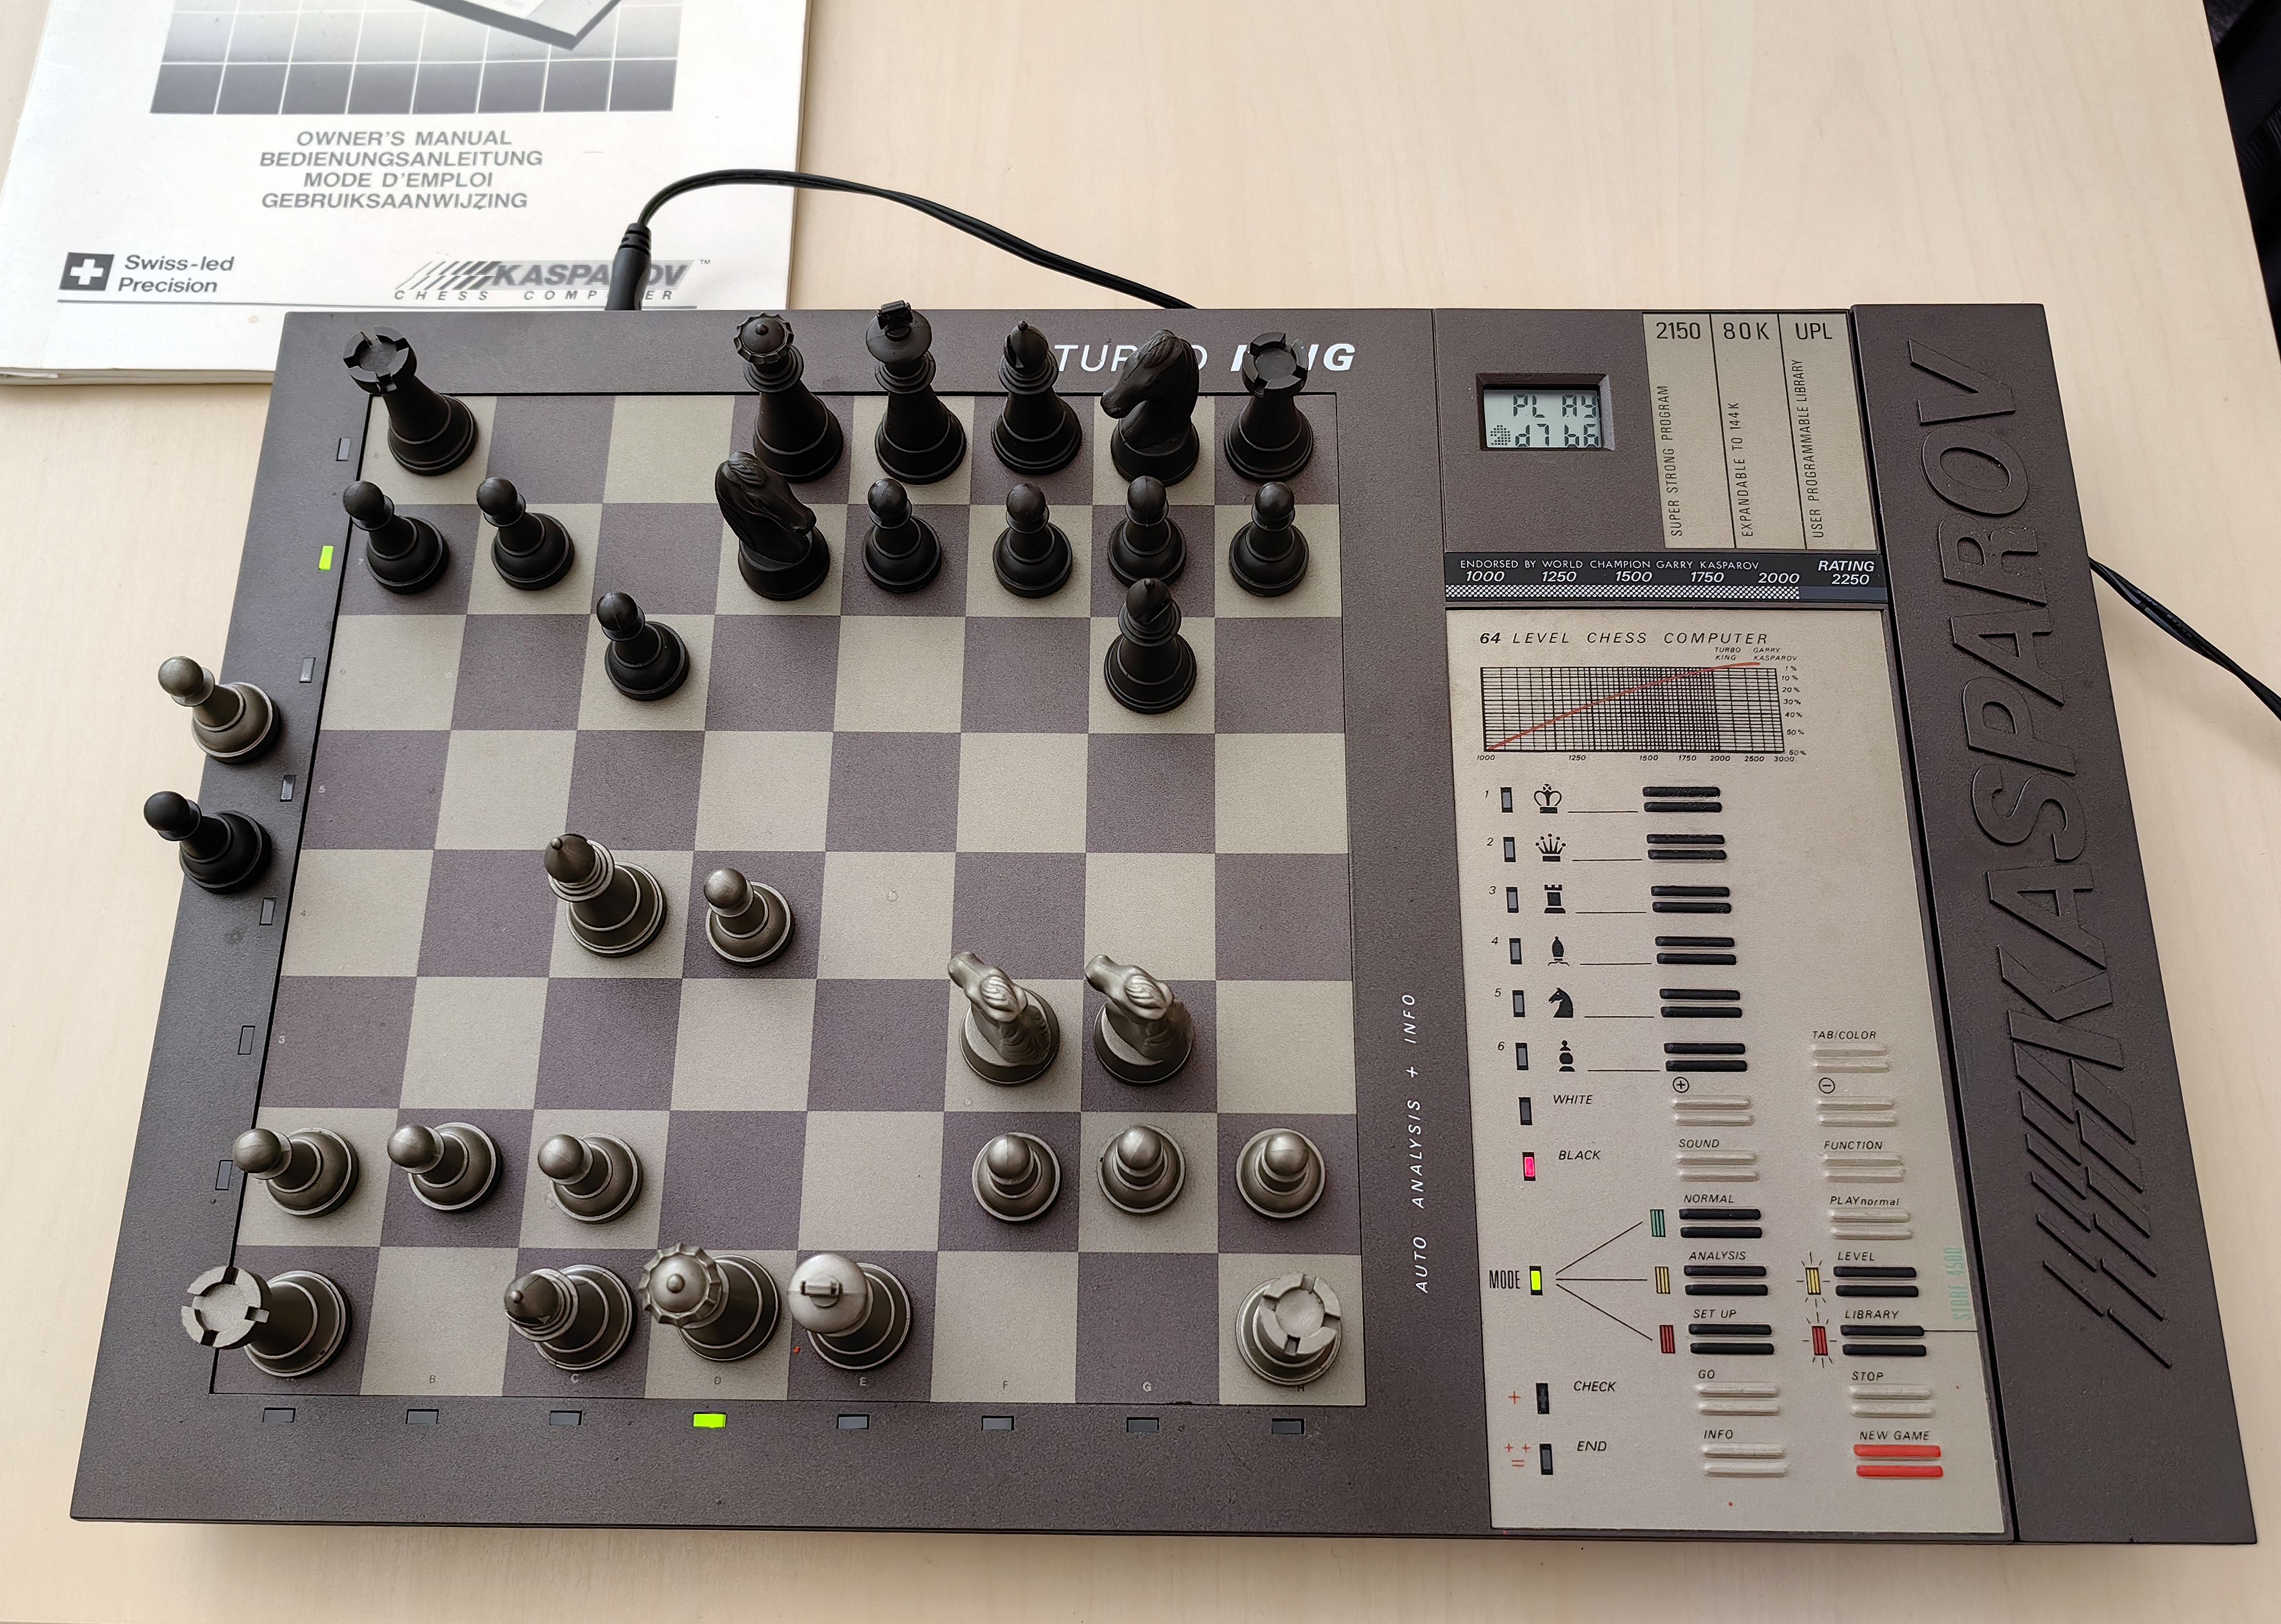 How Computers Play Chess